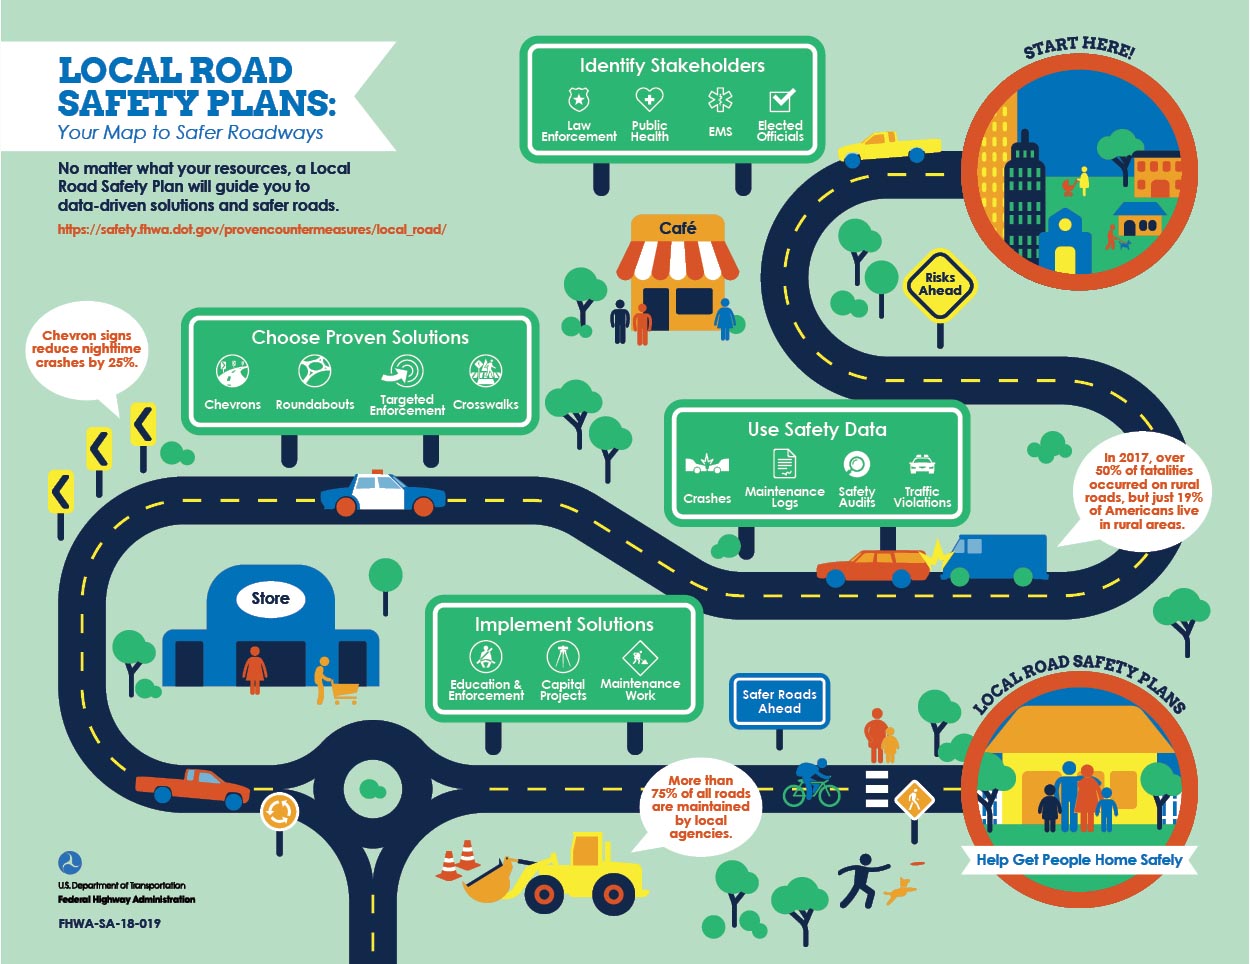 Illustration titled “Local Road Safety Plans: Your Map to Safer Roadways.” Illustration shows steps to developing a plan as signs along a road. It reads:
No matter what your resources, a local road safety plan will guide you to data-driven solutions and safer roads. https://safety.fhwa.dot.gov/provencountermeasures/local_road/
Identify stakeholders: law enforcement, public health, E-M-S, elected officials.
Use safety data: crashes, maintenance logs, safety audits, traffic violations. In 2017, over 50 percent of fatalities occurred on rural roads, but just 19 percent of Americans live in rural areas.
Choose proven solutions: chevrons, roundabouts, targeted enforcement, crosswalks. Chevron signs reduce nighttime crashes by 25 percent.
Implement solutions: education and enforcement, capital projects, maintenance work. More than 75 percent of all roads are maintained by local agencies.
Local road safety plans help people get home safely.
